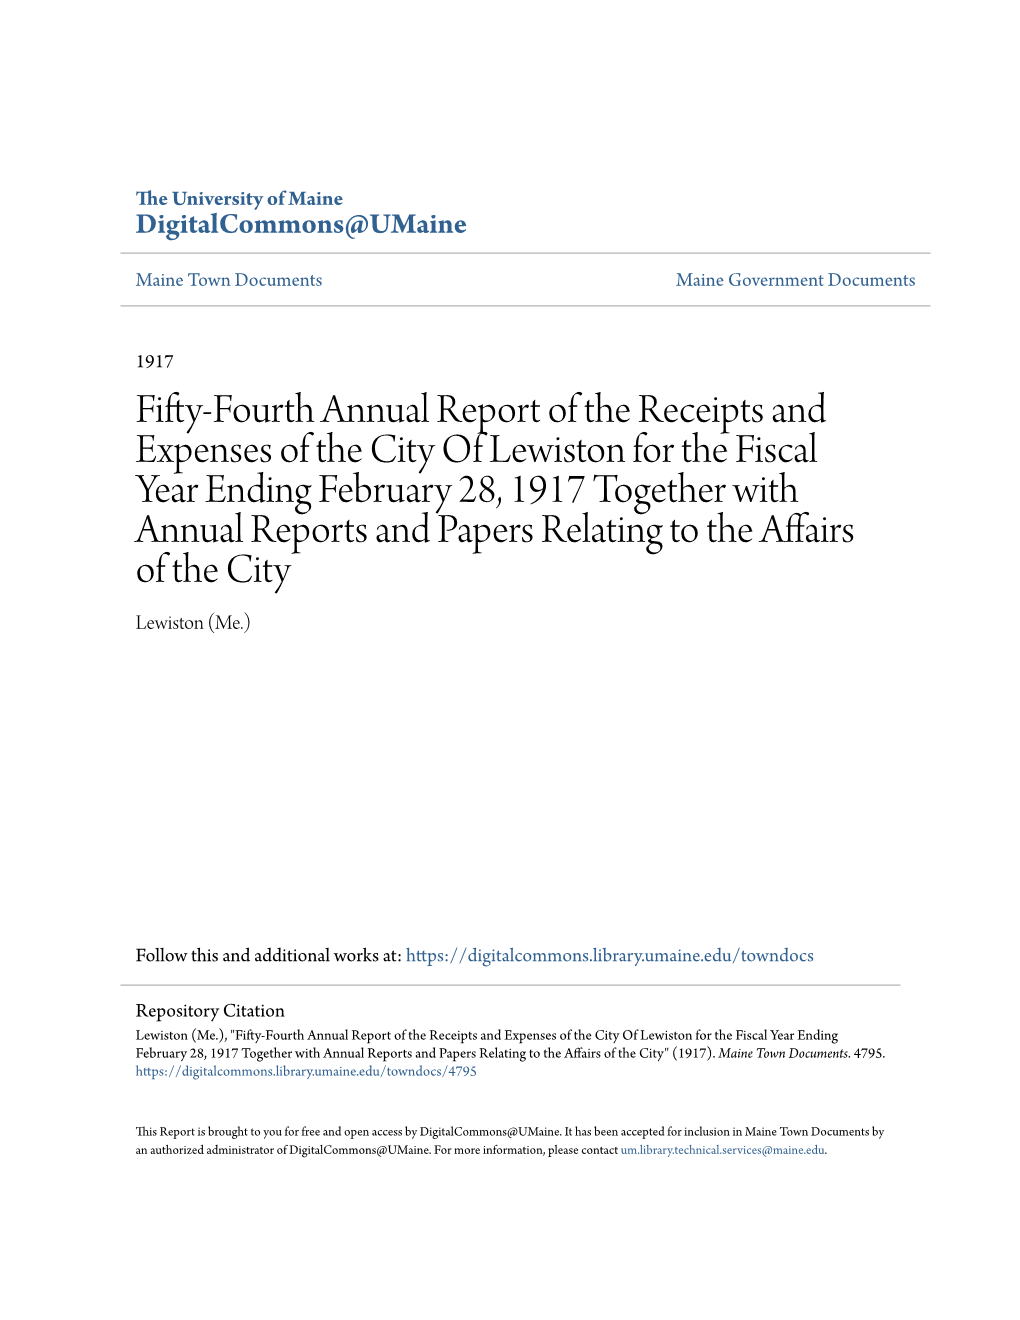 Fifty-Fourth Annual Report of the Receipts and Expenses of the City of Lewiston for the Fiscal Year Ending February 28, 1917